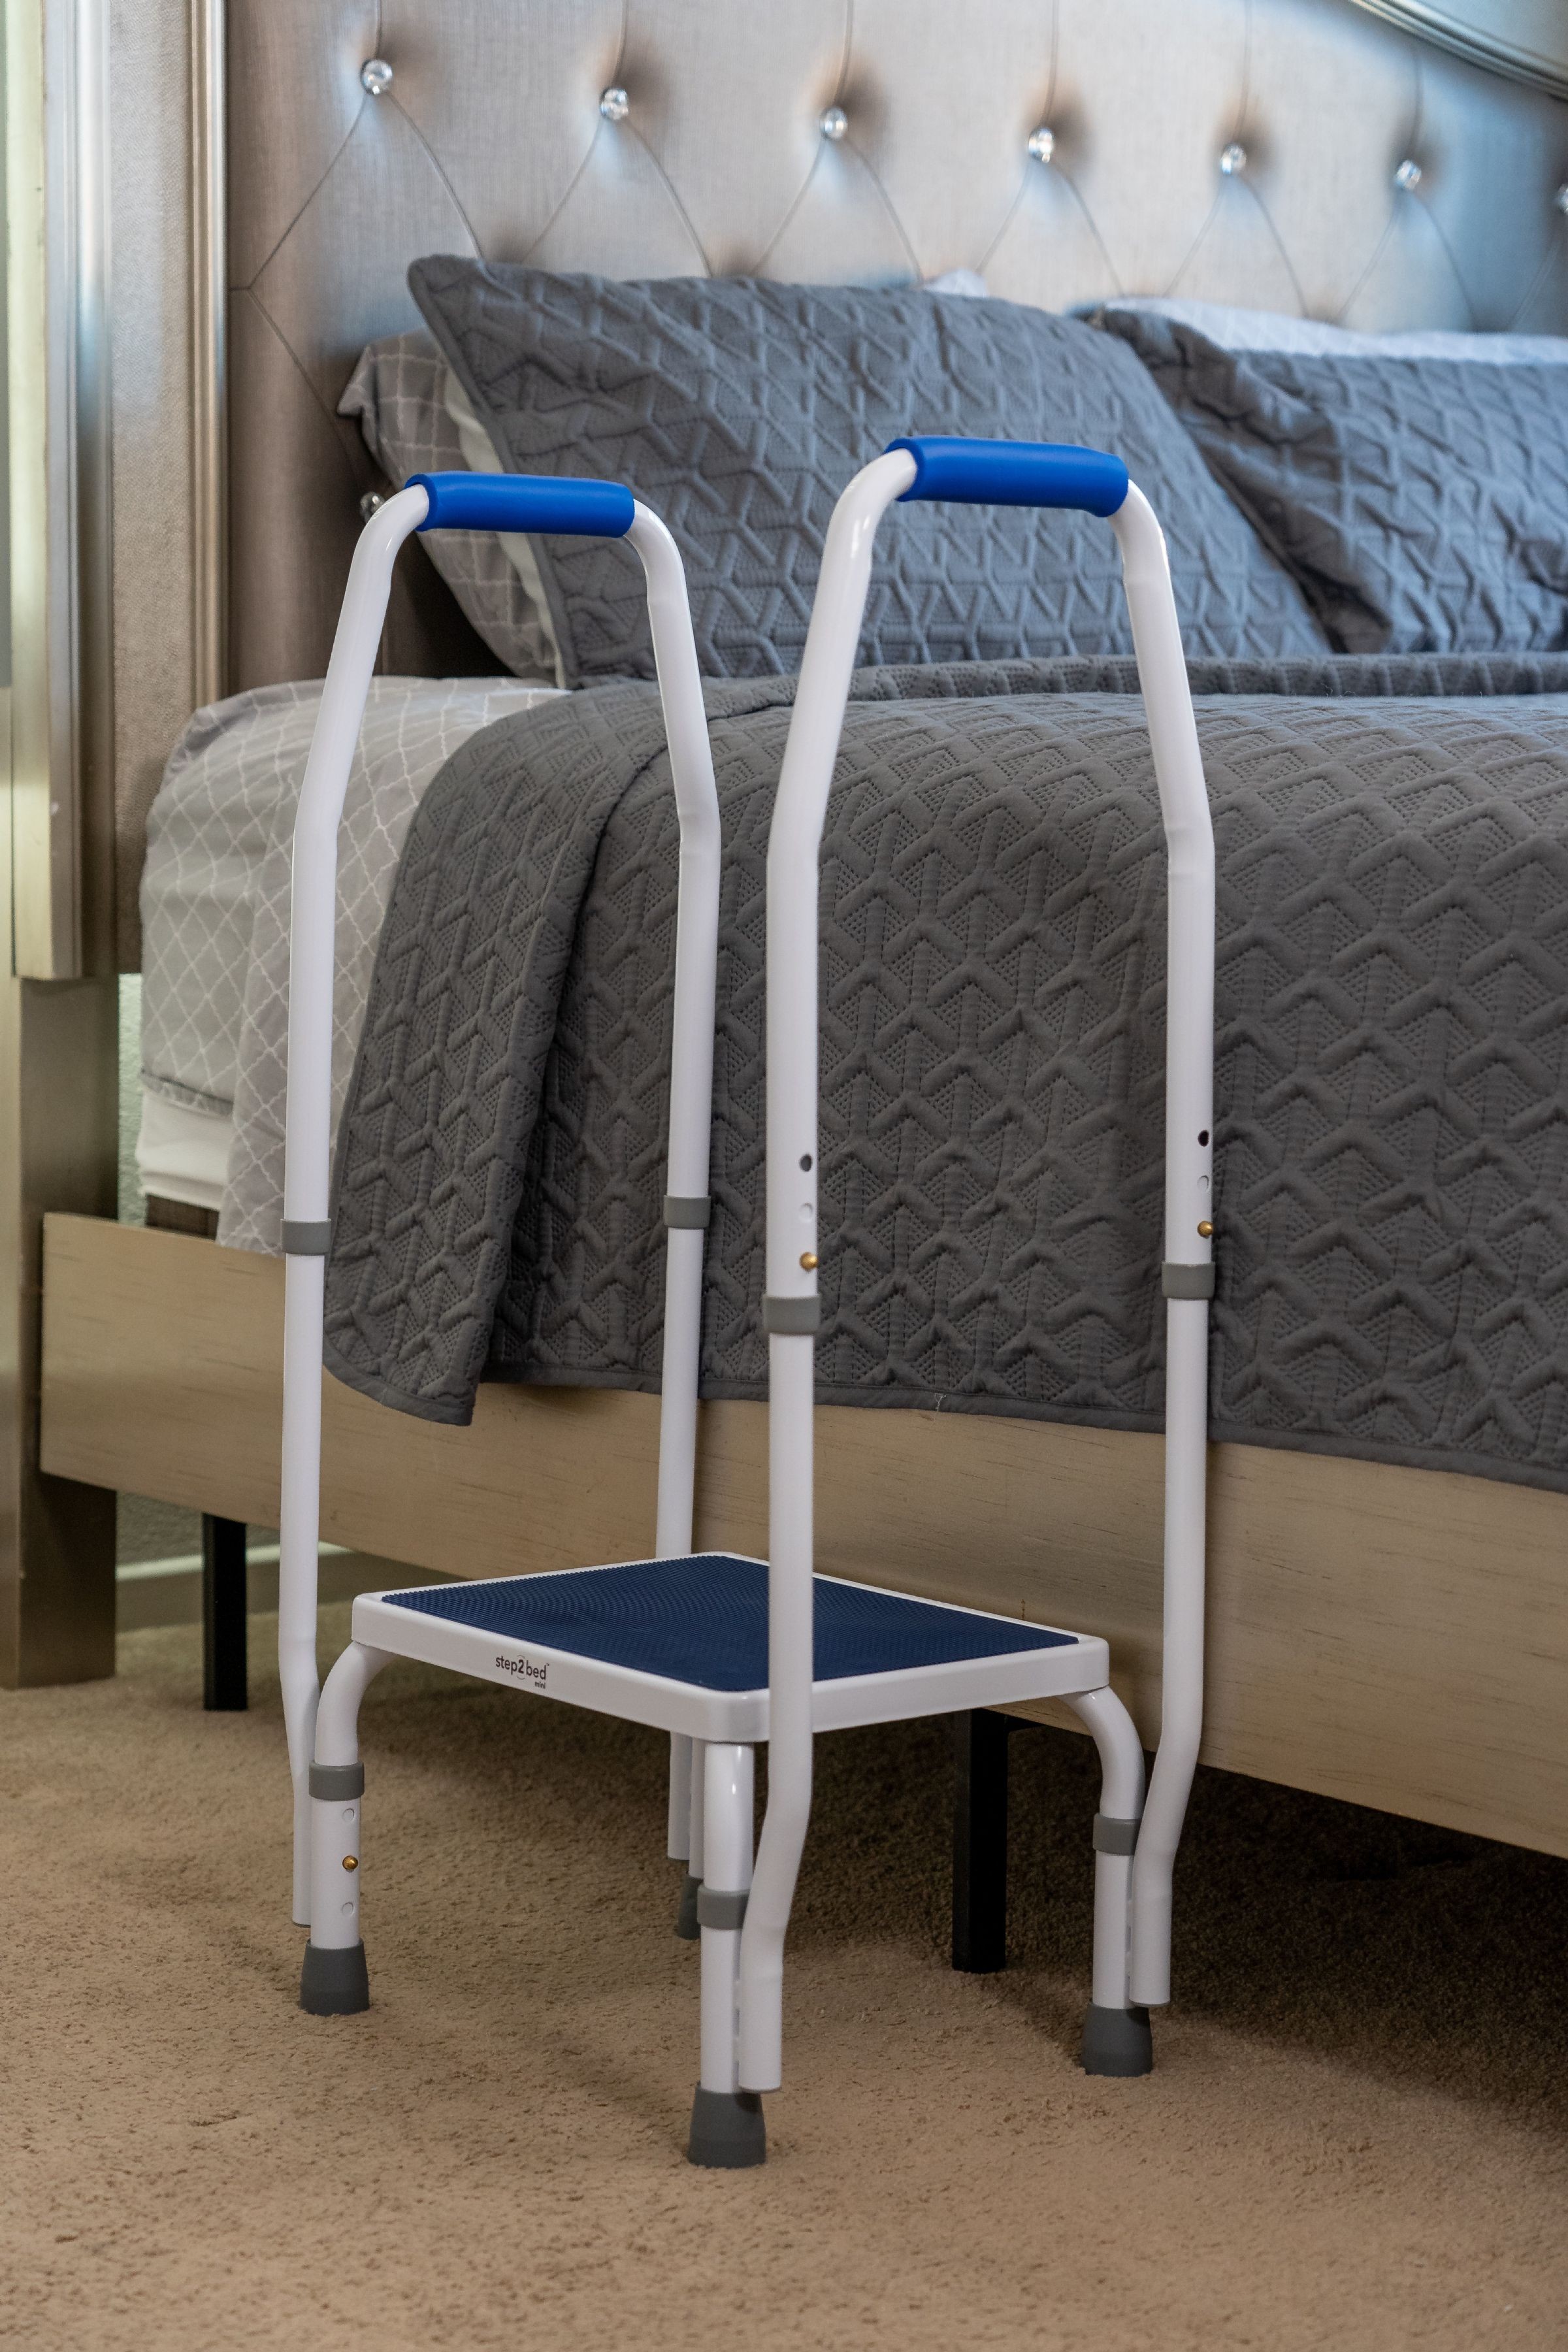 walgreens medical equipment safety bed rails